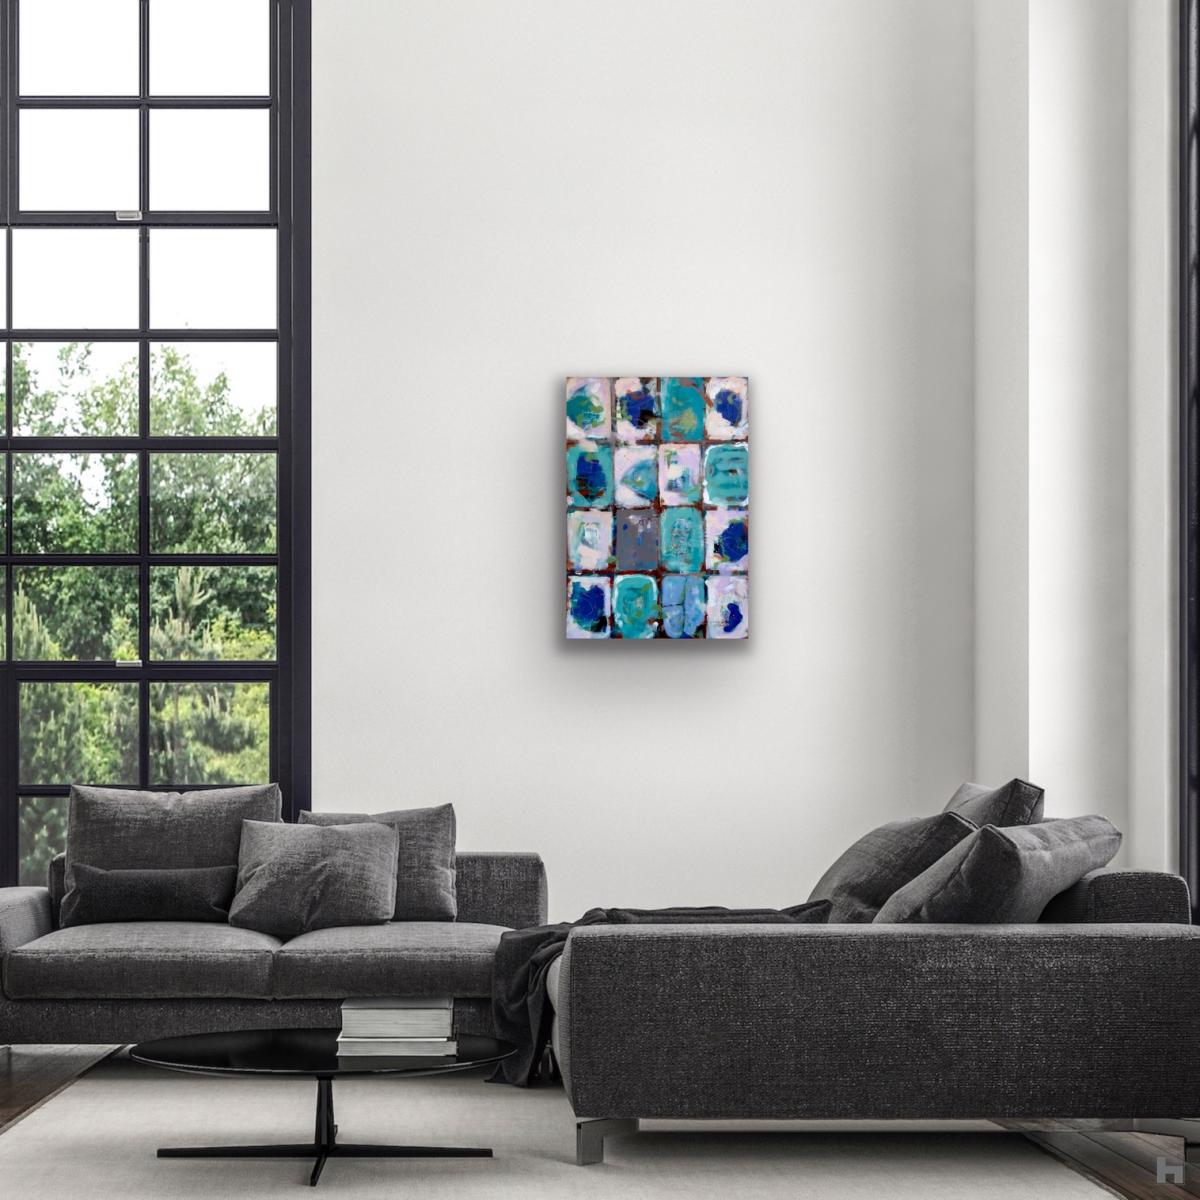 An abstract painting representing small blue and green windows on a wall